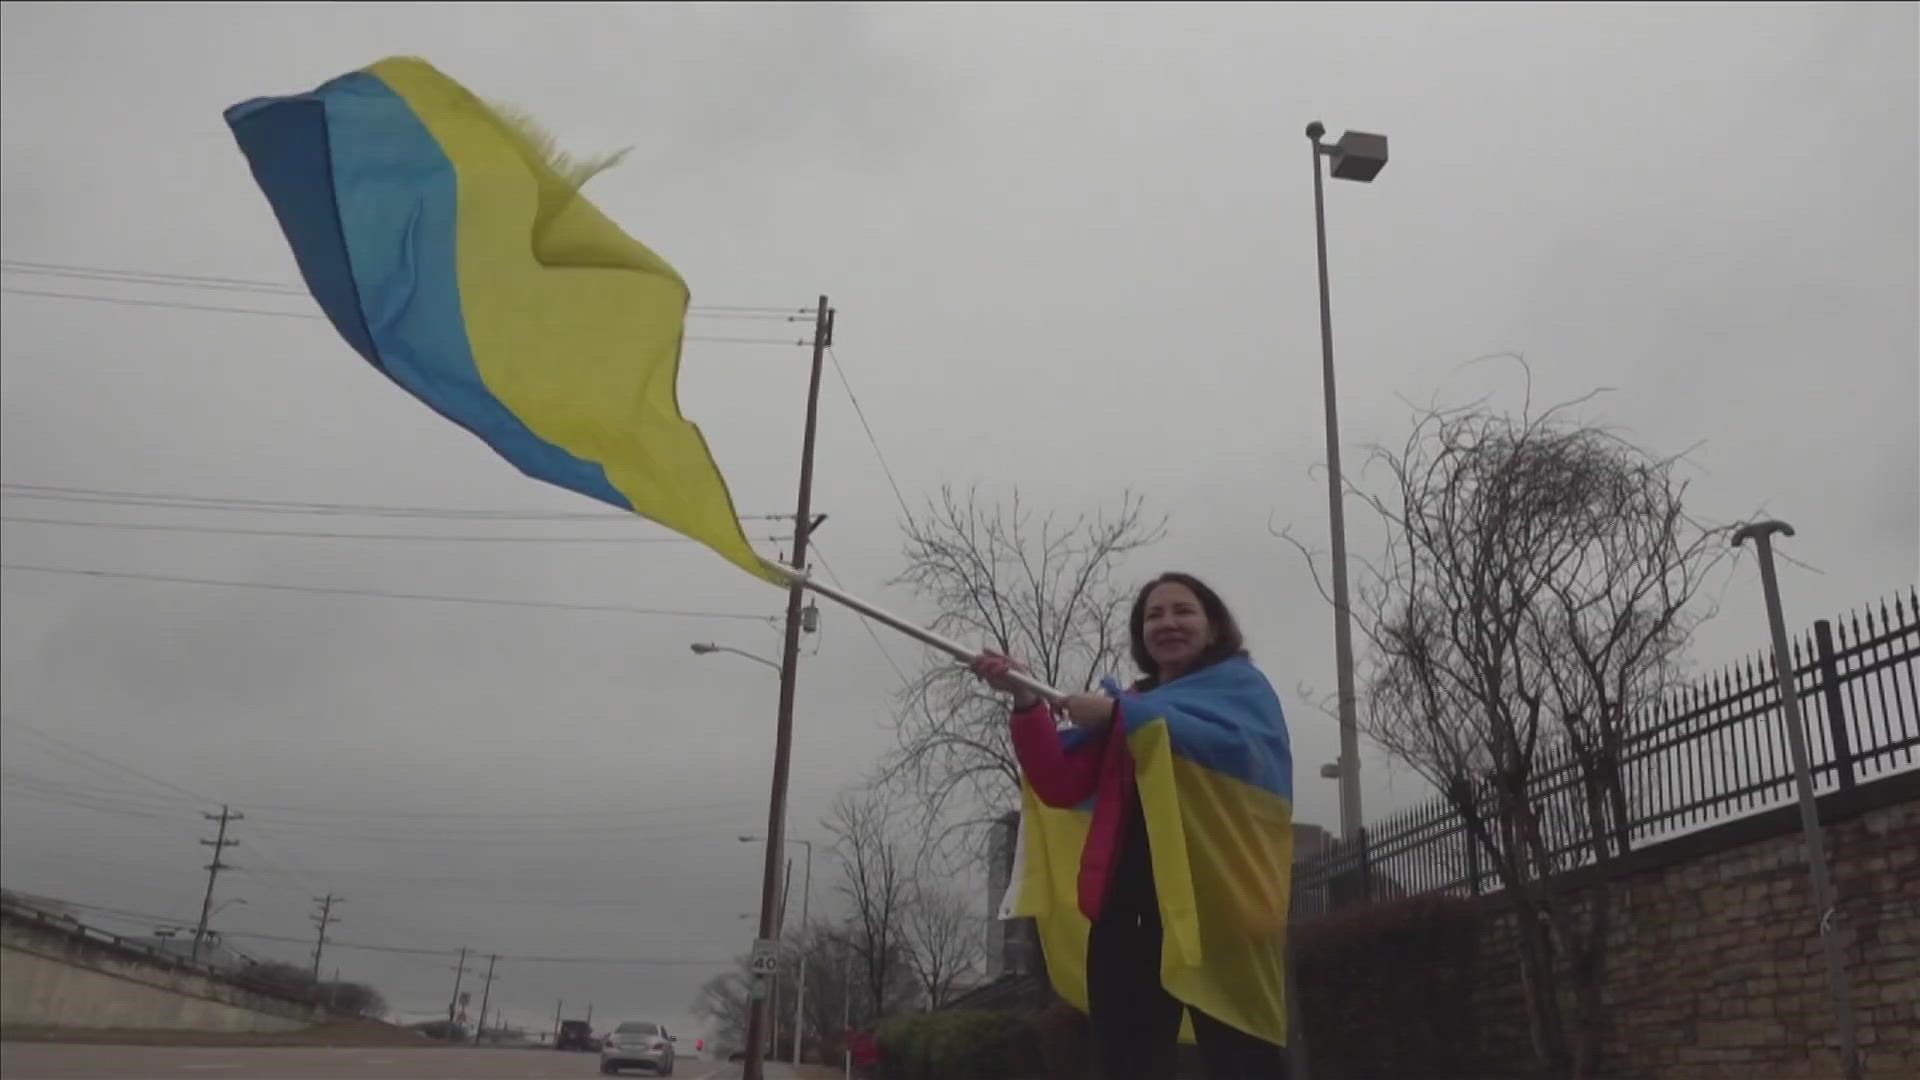 About one year ago, the world woke to news that Russian missiles were hitting Ukraine's capital city. Protesters supported Ukraine here in Memphis on Sunday.